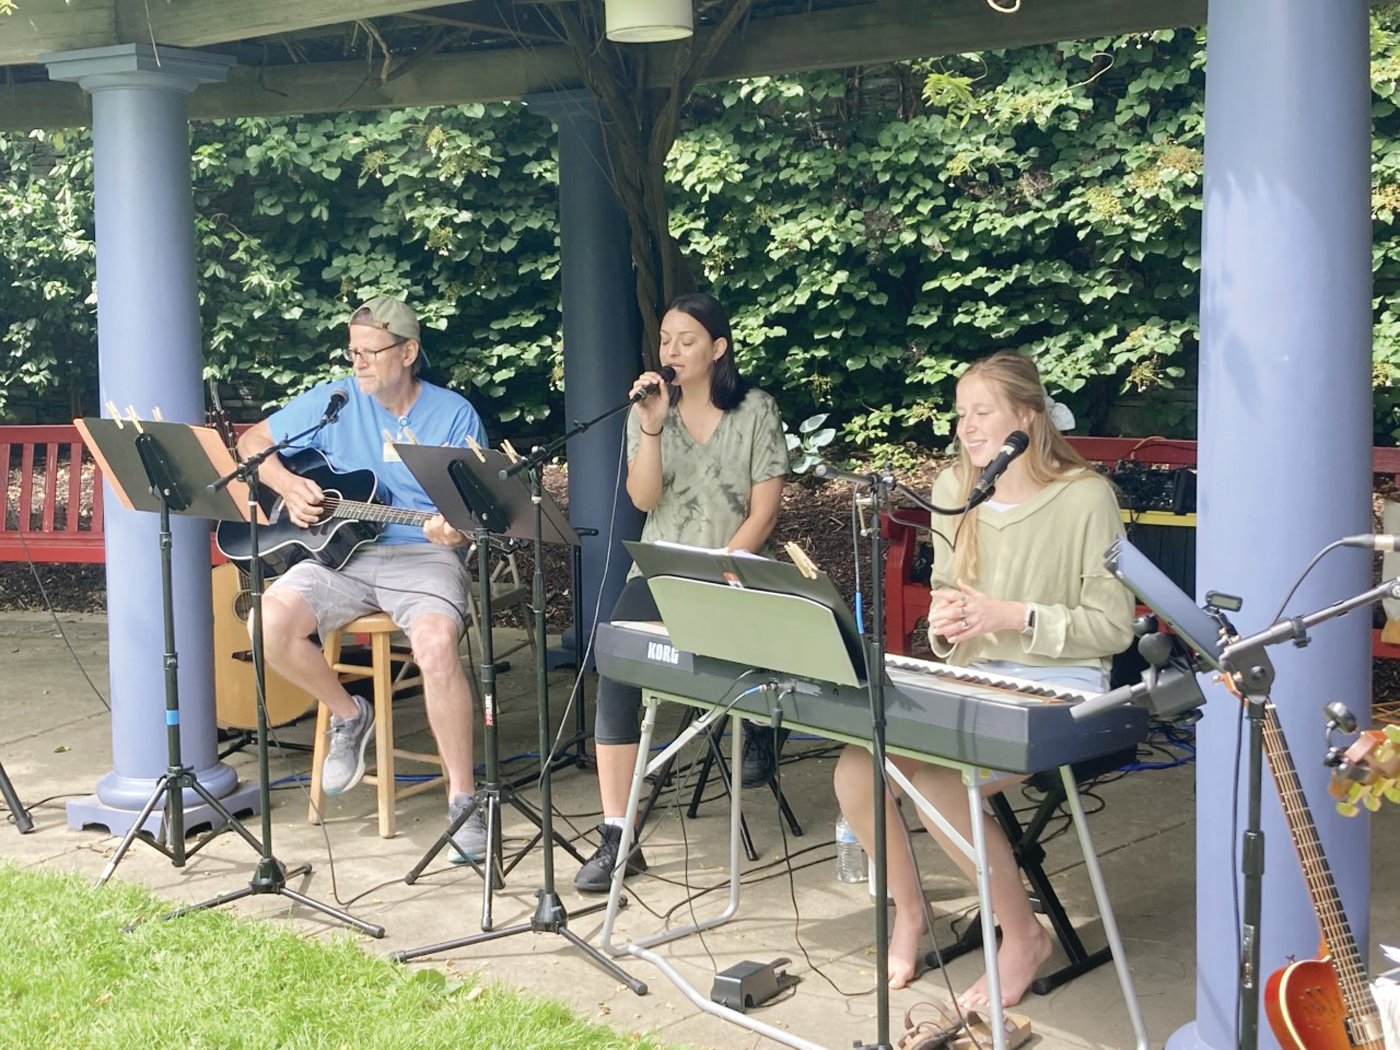 HEADING BACK TO WICKFORD: Alyssa joined the band in 2021, and her first concert was at the Wickford Art Fest. The group will return to the festival this July.